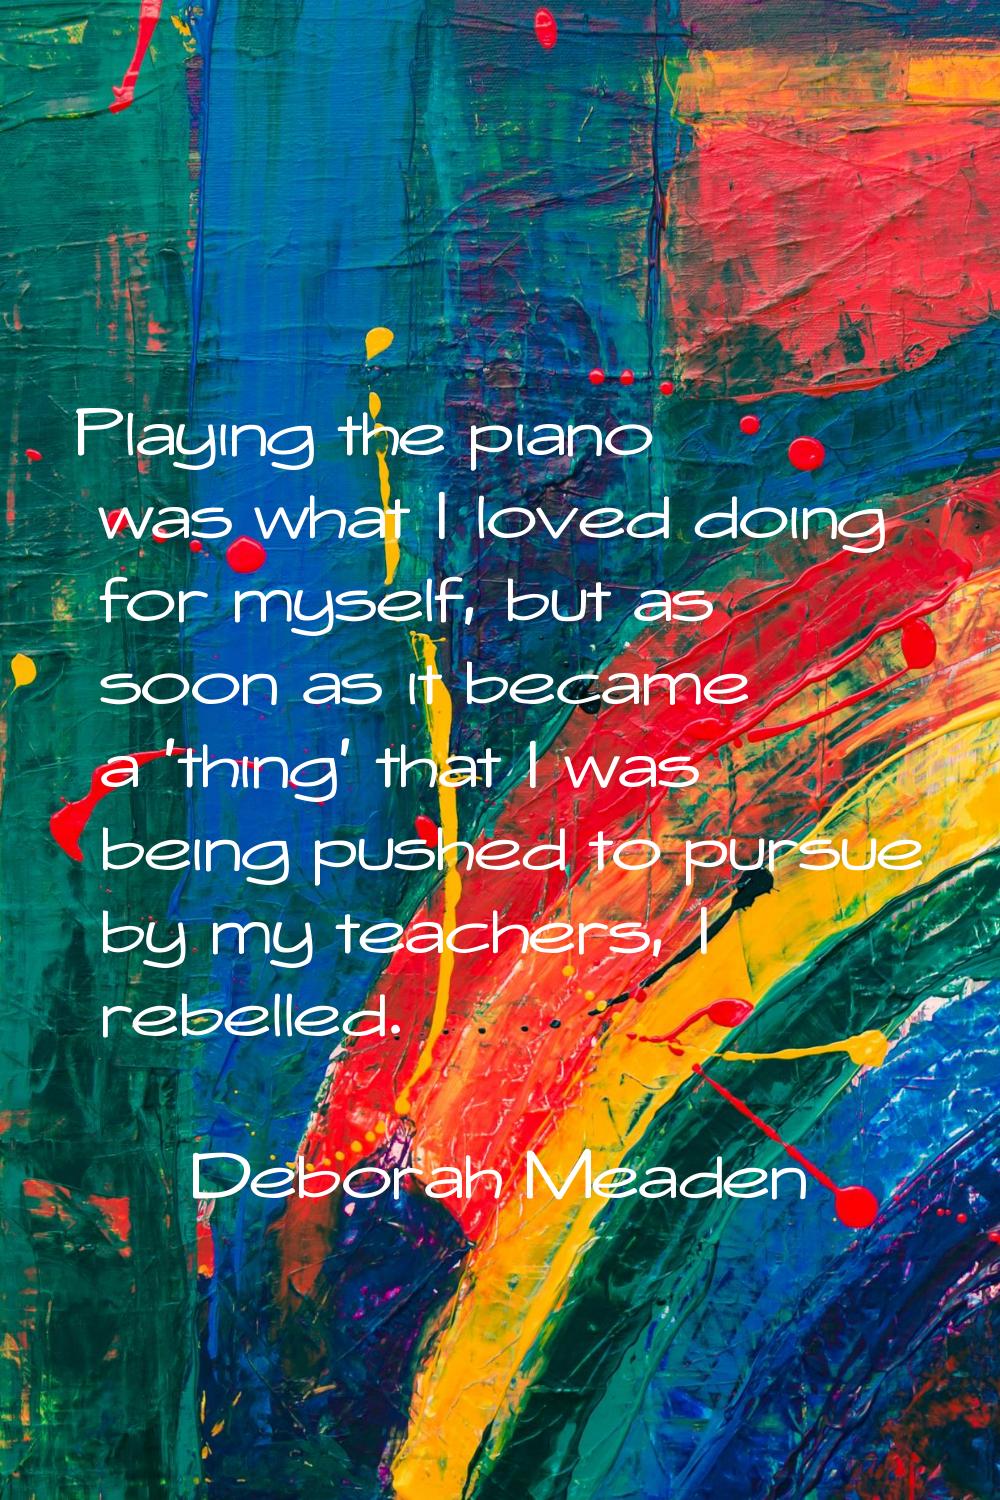 Playing the piano was what I loved doing for myself, but as soon as it became a 'thing' that I was 